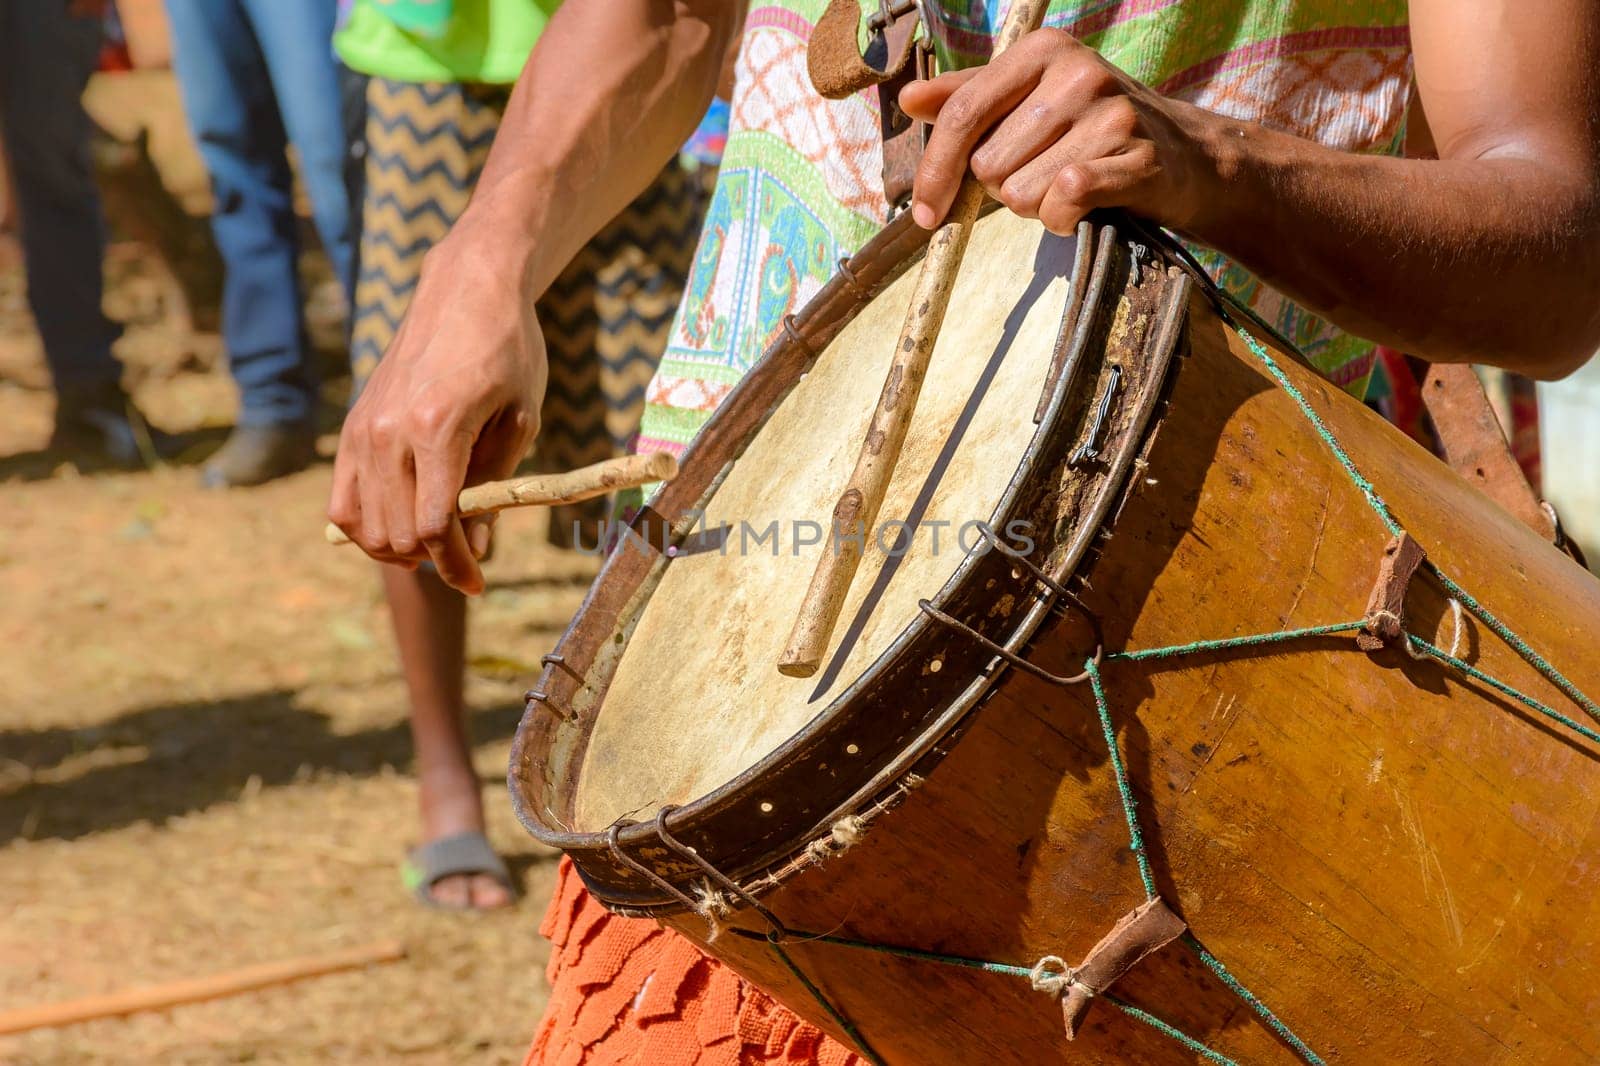 Ethnic and rustic handmade drums in a religious brazilian festival by Fred_Pinheiro